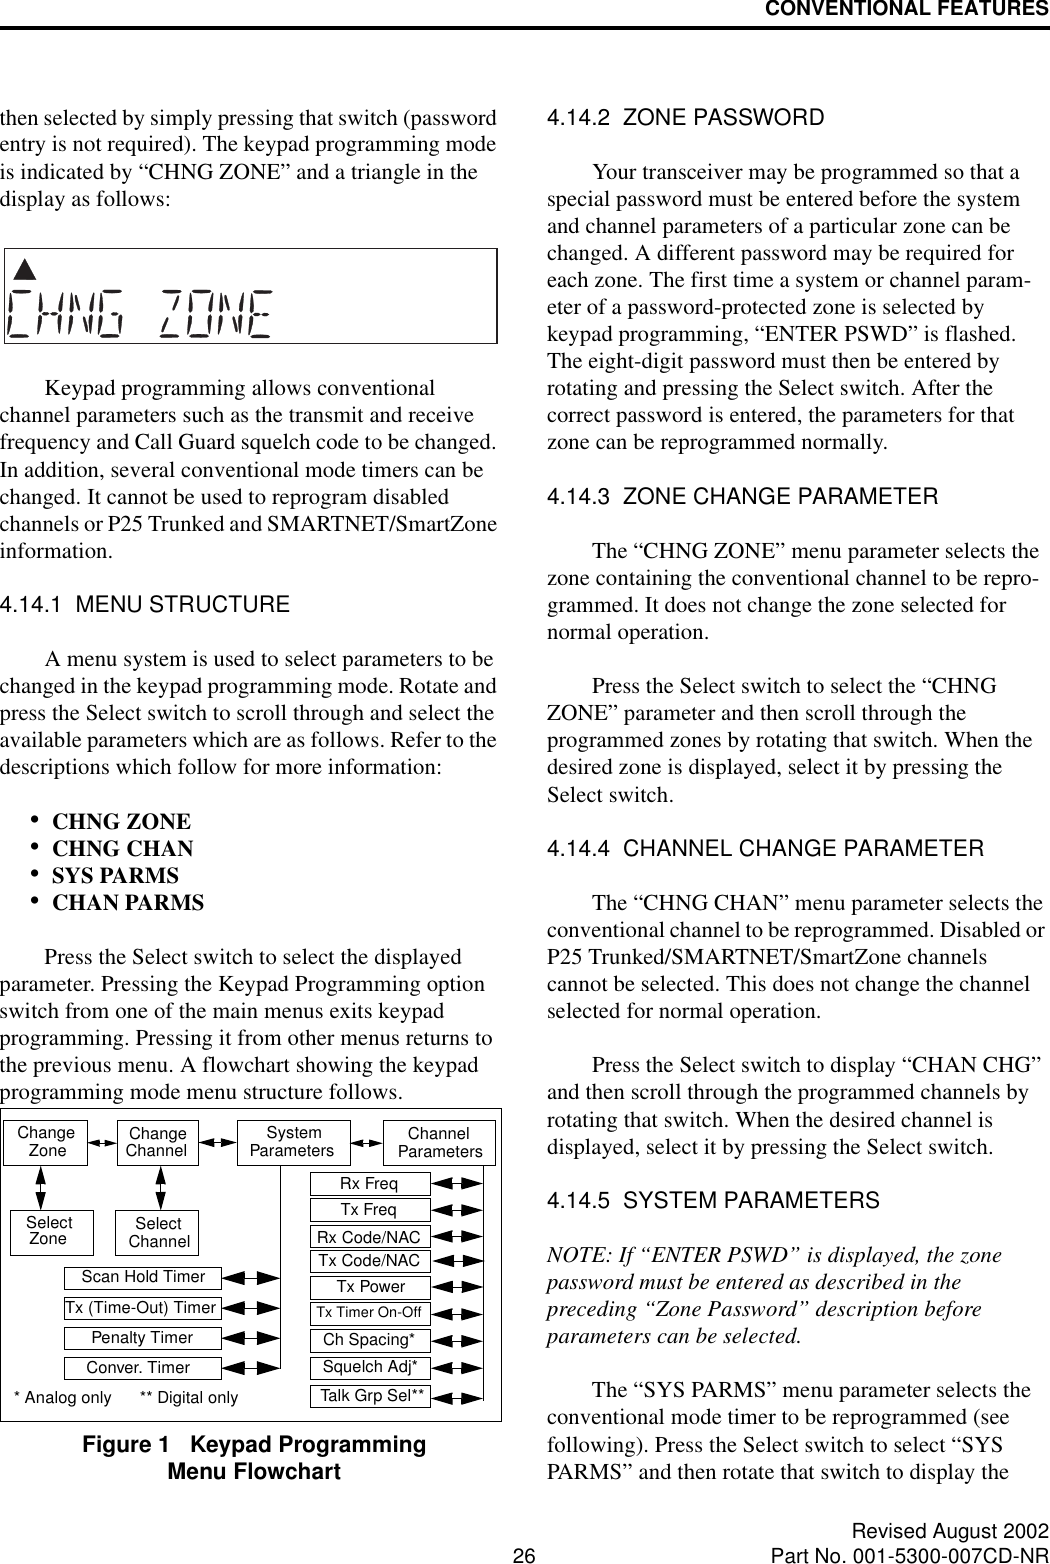 CONVENTIONAL FEATURES26 Revised August 2002Part No. 001-5300-007CD-NRthen selected by simply pressing that switch (password entry is not required). The keypad programming mode is indicated by “CHNG ZONE” and a triangle in the display as follows:Keypad programming allows conventional channel parameters such as the transmit and receive frequency and Call Guard squelch code to be changed. In addition, several conventional mode timers can be changed. It cannot be used to reprogram disabled channels or P25 Trunked and SMARTNET/SmartZone information.4.14.1  MENU STRUCTUREA menu system is used to select parameters to be changed in the keypad programming mode. Rotate and press the Select switch to scroll through and select the available parameters which are as follows. Refer to the descriptions which follow for more information:•CHNG ZONE •CHNG CHAN •SYS PARMS •CHAN PARMS Press the Select switch to select the displayed parameter. Pressing the Keypad Programming option switch from one of the main menus exits keypad programming. Pressing it from other menus returns to the previous menu. A flowchart showing the keypad programming mode menu structure follows.Figure 1   Keypad Programming Menu Flowchart4.14.2  ZONE PASSWORDYour transceiver may be programmed so that a special password must be entered before the system and channel parameters of a particular zone can be changed. A different password may be required for each zone. The first time a system or channel param-eter of a password-protected zone is selected by keypad programming, “ENTER PSWD” is flashed. The eight-digit password must then be entered by rotating and pressing the Select switch. After the correct password is entered, the parameters for that zone can be reprogrammed normally.4.14.3  ZONE CHANGE PARAMETERThe “CHNG ZONE” menu parameter selects the zone containing the conventional channel to be repro-grammed. It does not change the zone selected for normal operation. Press the Select switch to select the “CHNG ZONE” parameter and then scroll through the programmed zones by rotating that switch. When the desired zone is displayed, select it by pressing the Select switch.4.14.4  CHANNEL CHANGE PARAMETERThe “CHNG CHAN” menu parameter selects the conventional channel to be reprogrammed. Disabled or P25 Trunked/SMARTNET/SmartZone channels cannot be selected. This does not change the channel selected for normal operation.Press the Select switch to display “CHAN CHG” and then scroll through the programmed channels by rotating that switch. When the desired channel is displayed, select it by pressing the Select switch. 4.14.5  SYSTEM PARAMETERSNOTE: If “ENTER PSWD” is displayed, the zone password must be entered as described in the preceding “Zone Password” description before parameters can be selected.The “SYS PARMS” menu parameter selects the conventional mode timer to be reprogrammed (see following). Press the Select switch to select “SYS PARMS” and then rotate that switch to display the Change ChangeChannelZone System Parameters ChannelParametersSelectZone SelectChannelScan Hold TimerTx (Time-Out) TimerPenalty TimerConver. TimerRx FreqTx FreqRx Code/NACTx Code/NACTx PowerTx Timer On-OffSquelch Adj*Ch Spacing*Talk Grp Sel*** Analog only      ** Digital only